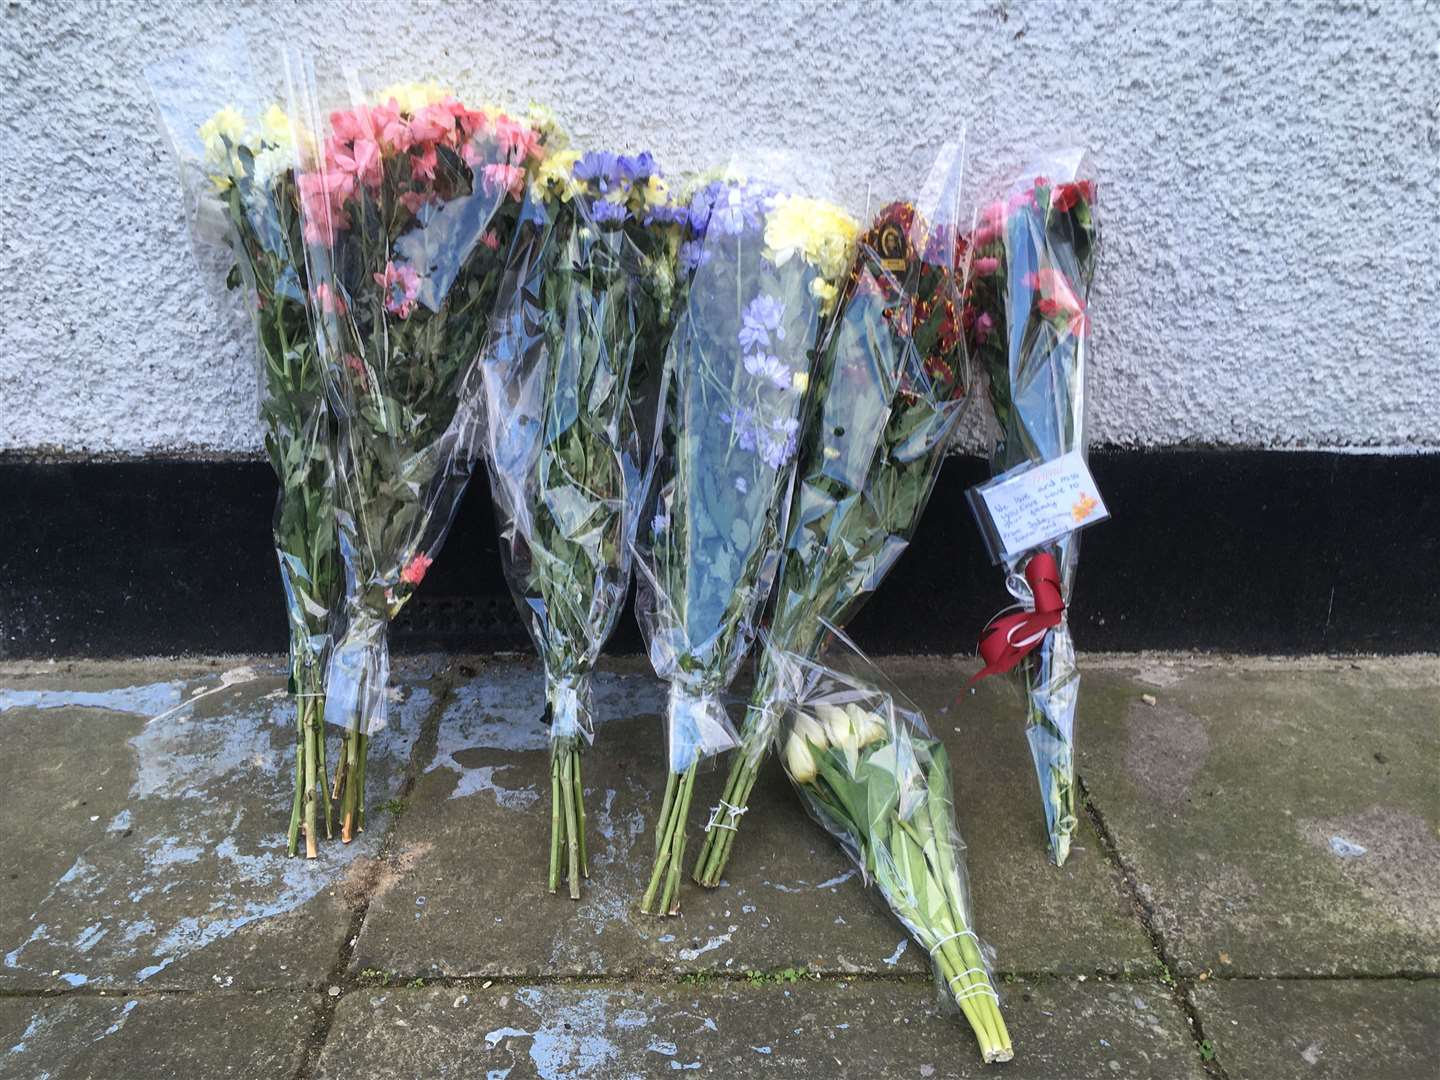 Floral tributes outside Emre's home in Berridge Road, Sheerness